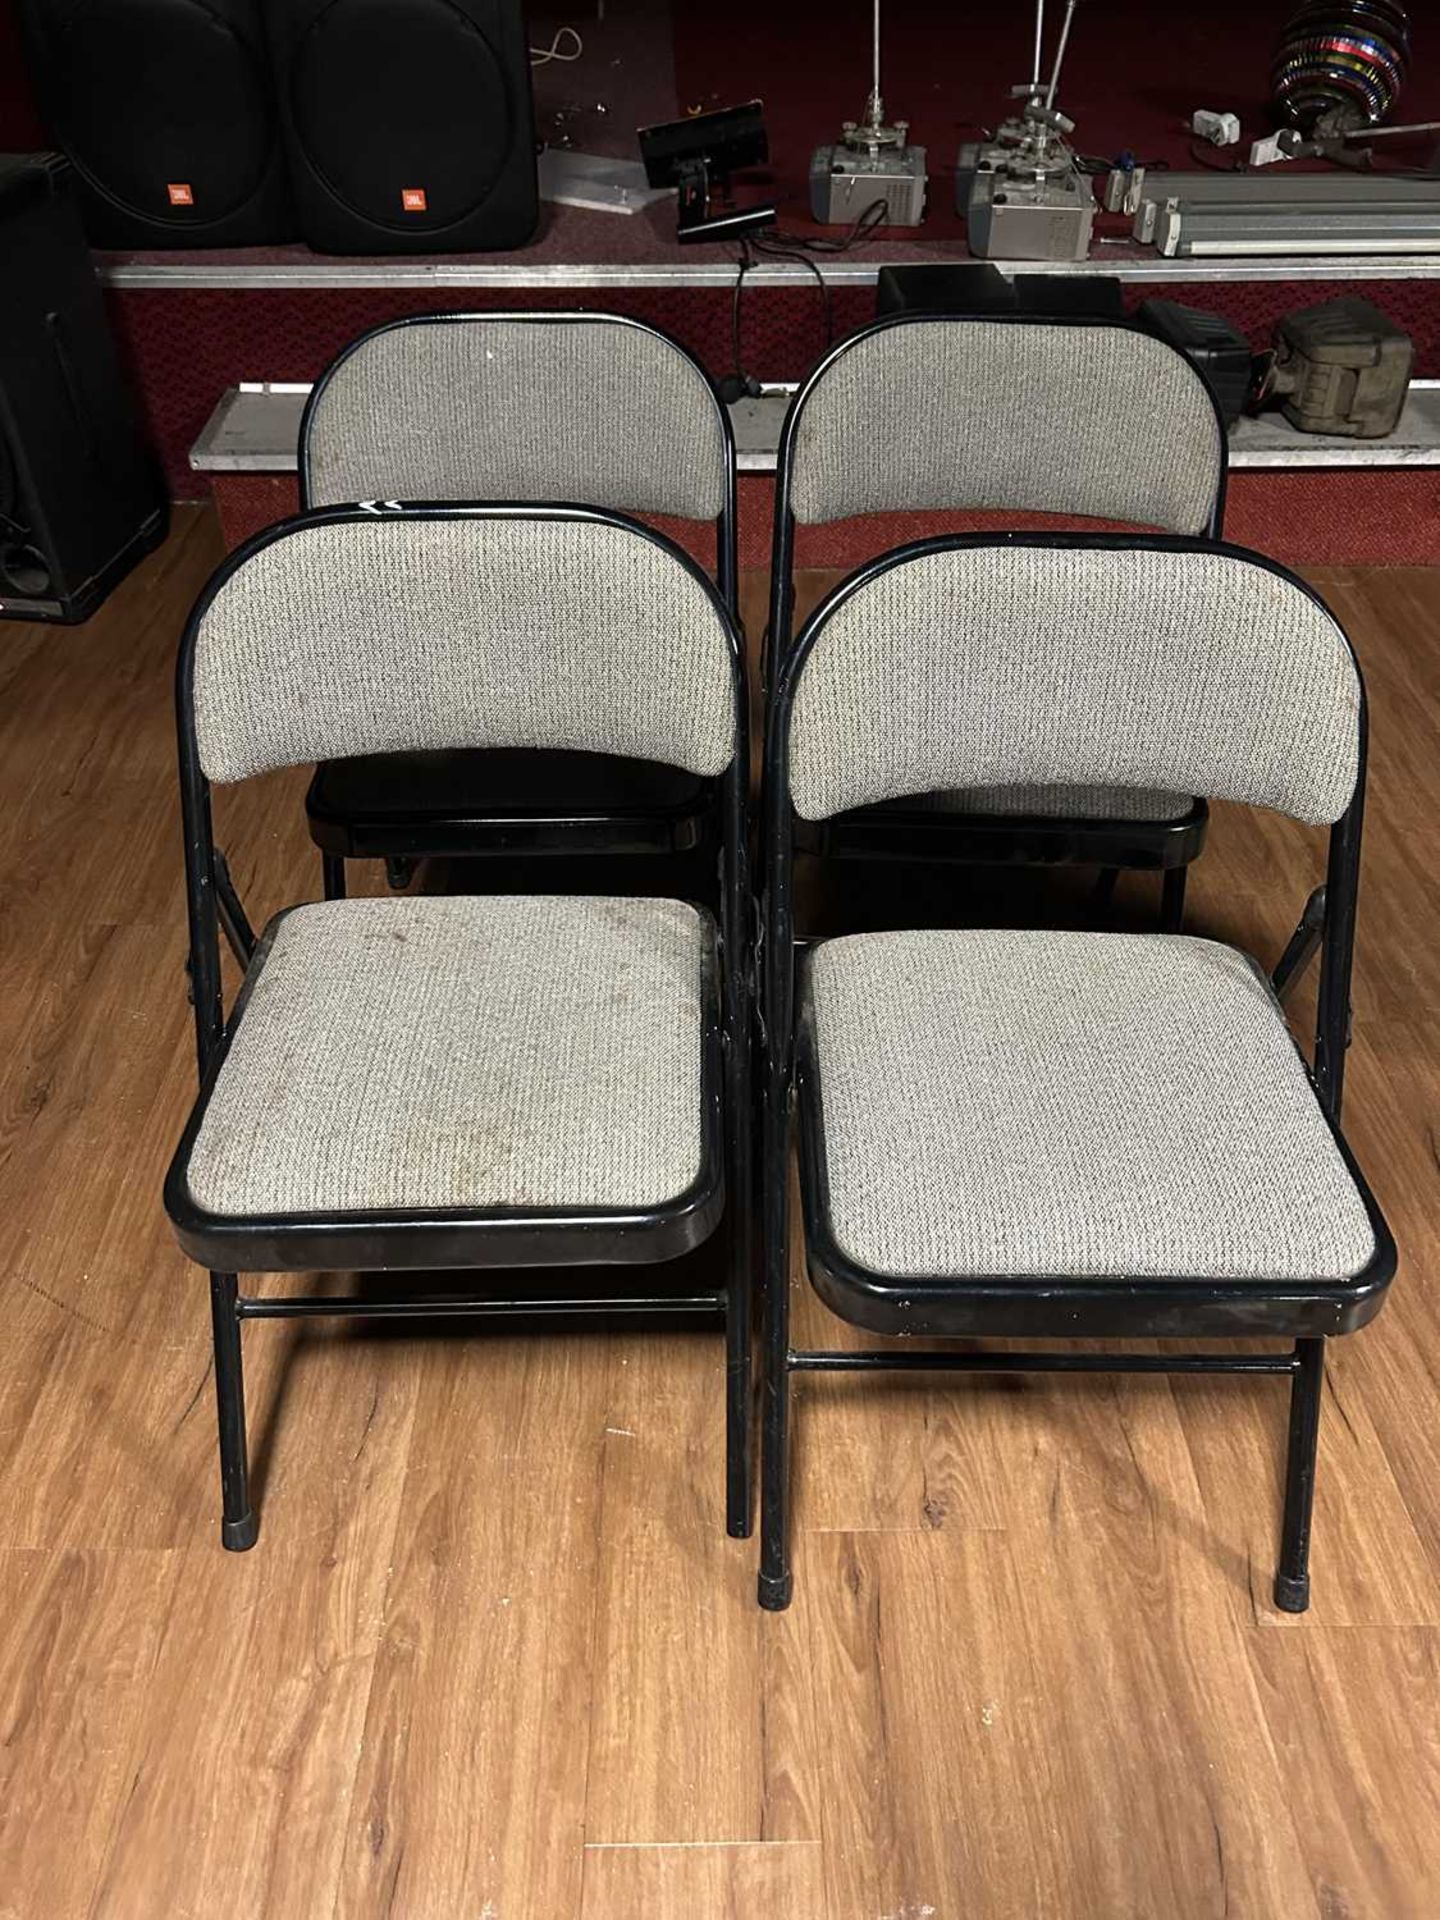 4 metal framed folding chairs